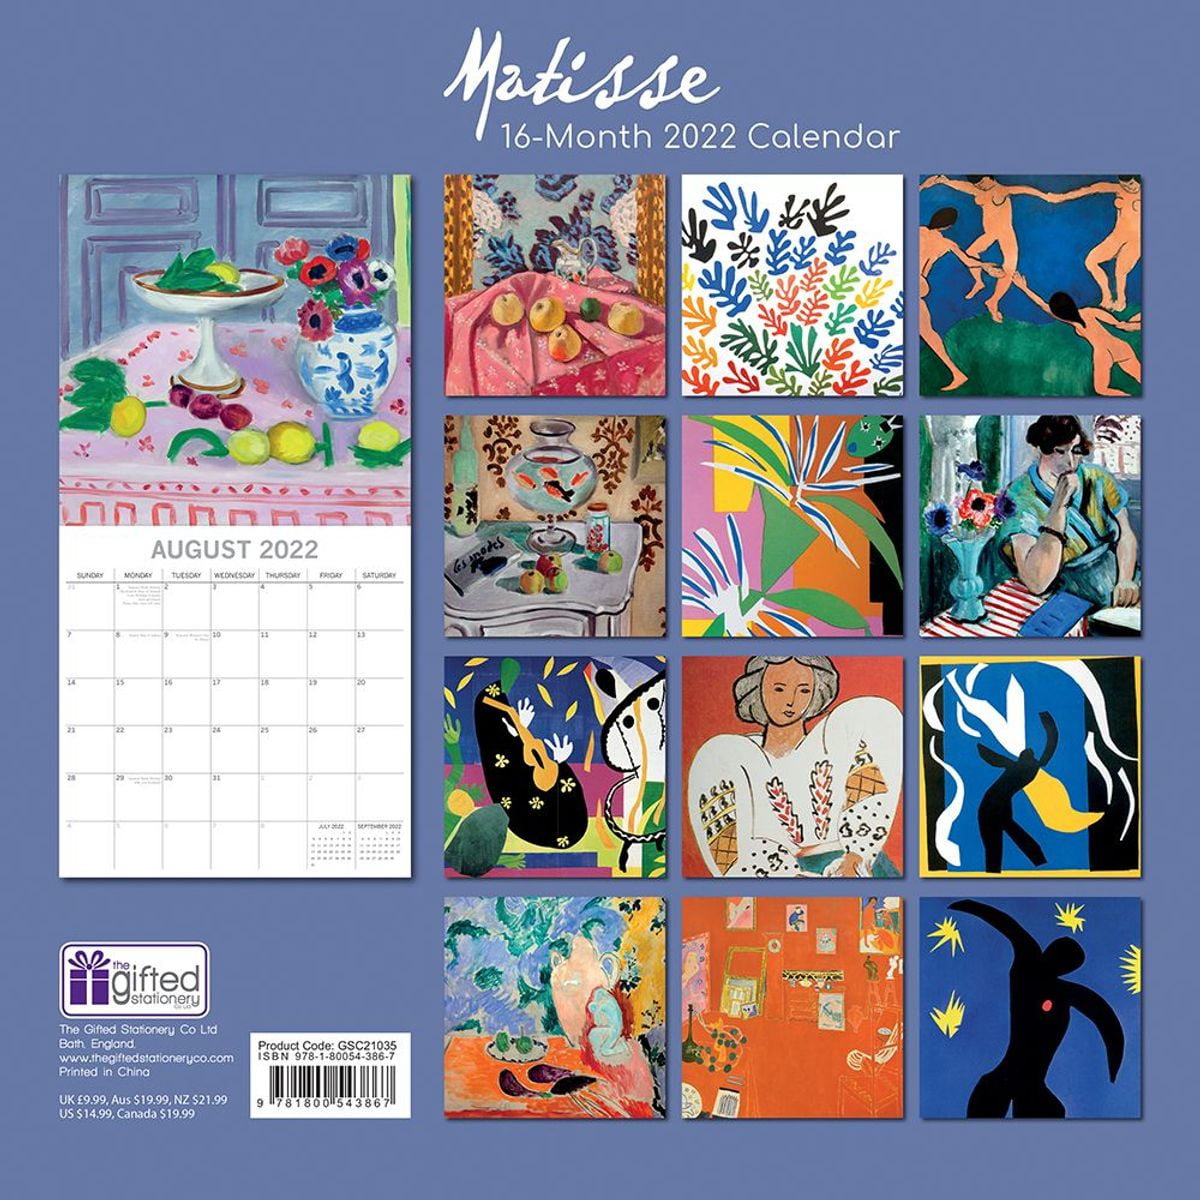 Famous Artists and Artworks Theme Includes 180 Reminder Stickers 2021 Wall Calendar 16-Month 12 x 12 Inch Monthly View Matisse